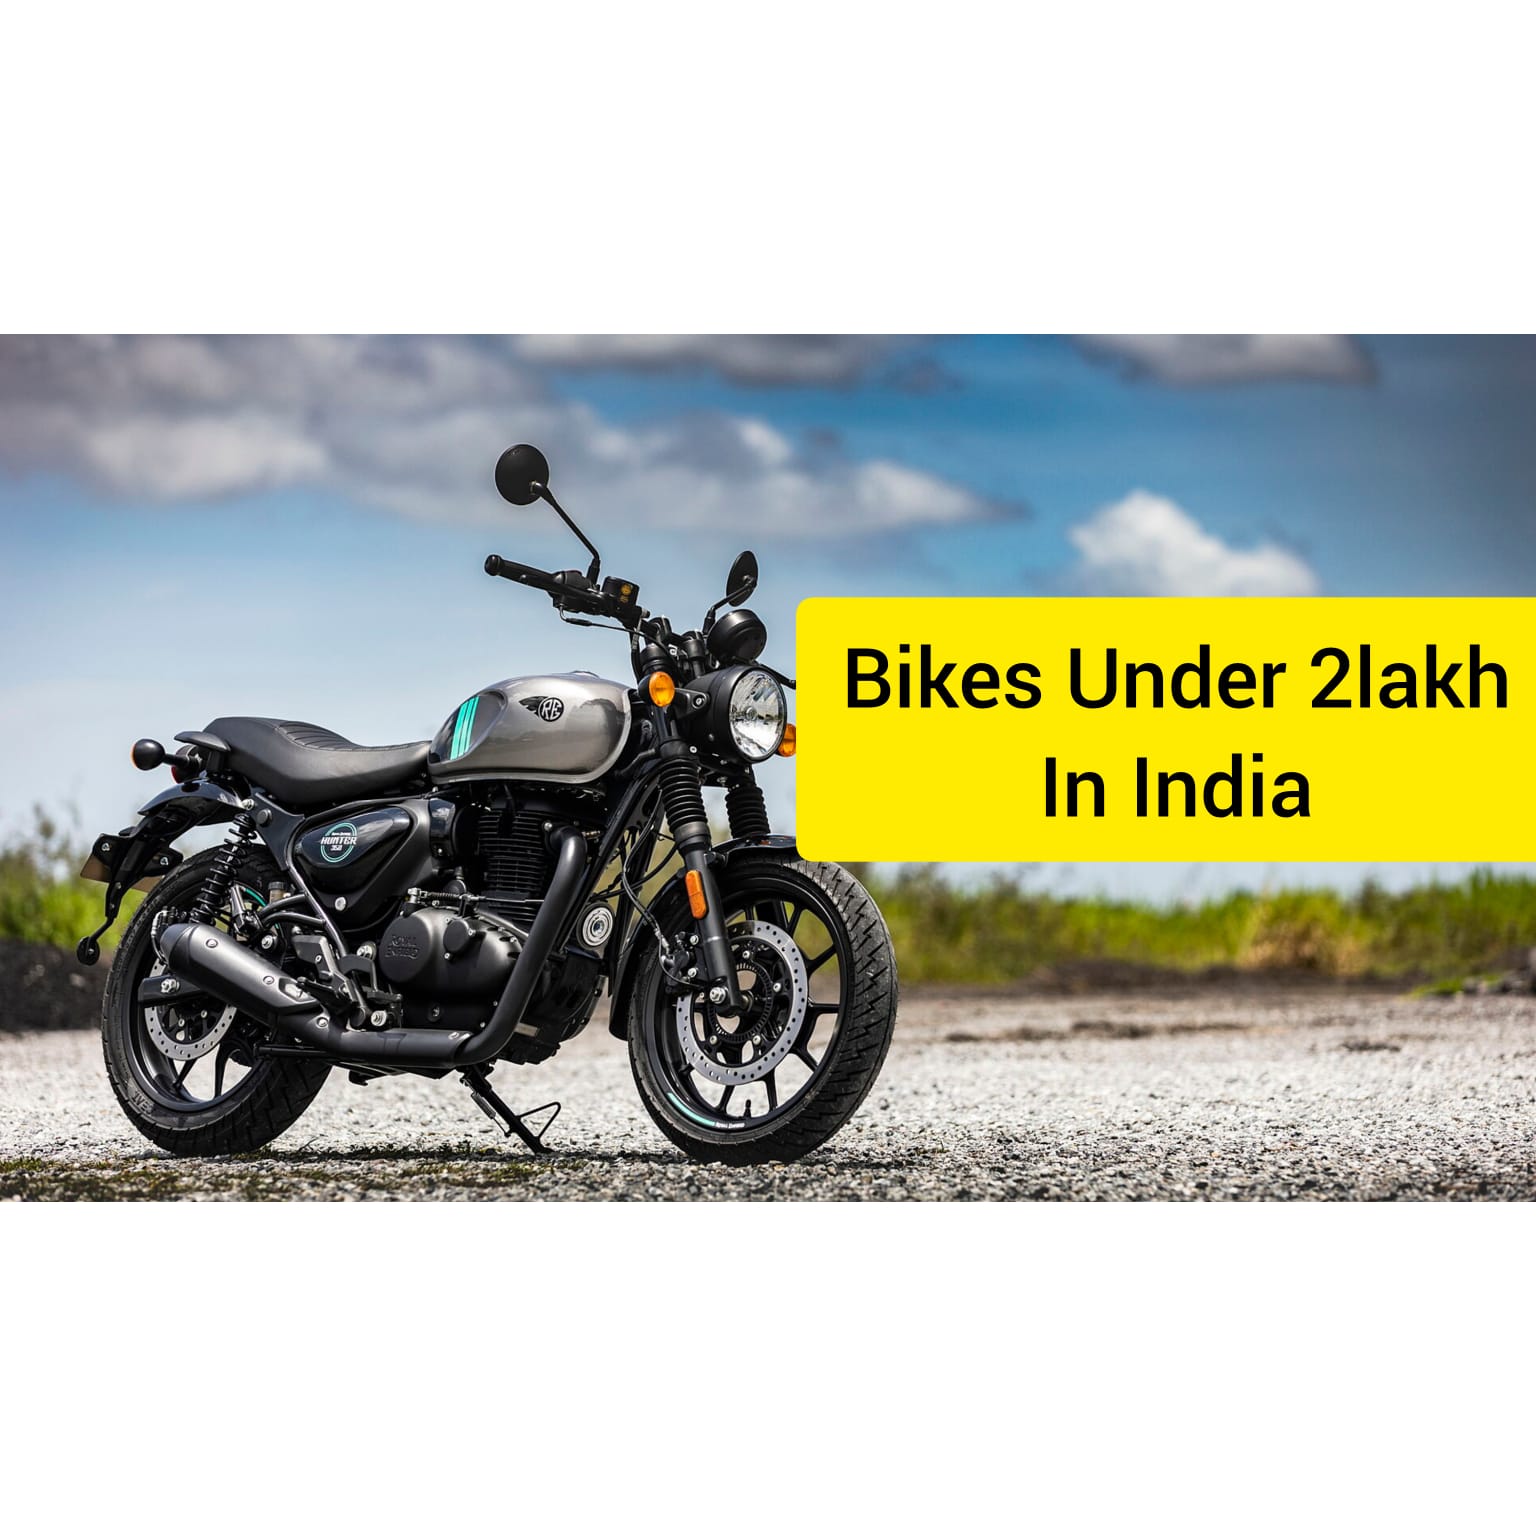 bikes under 2 lakh in India